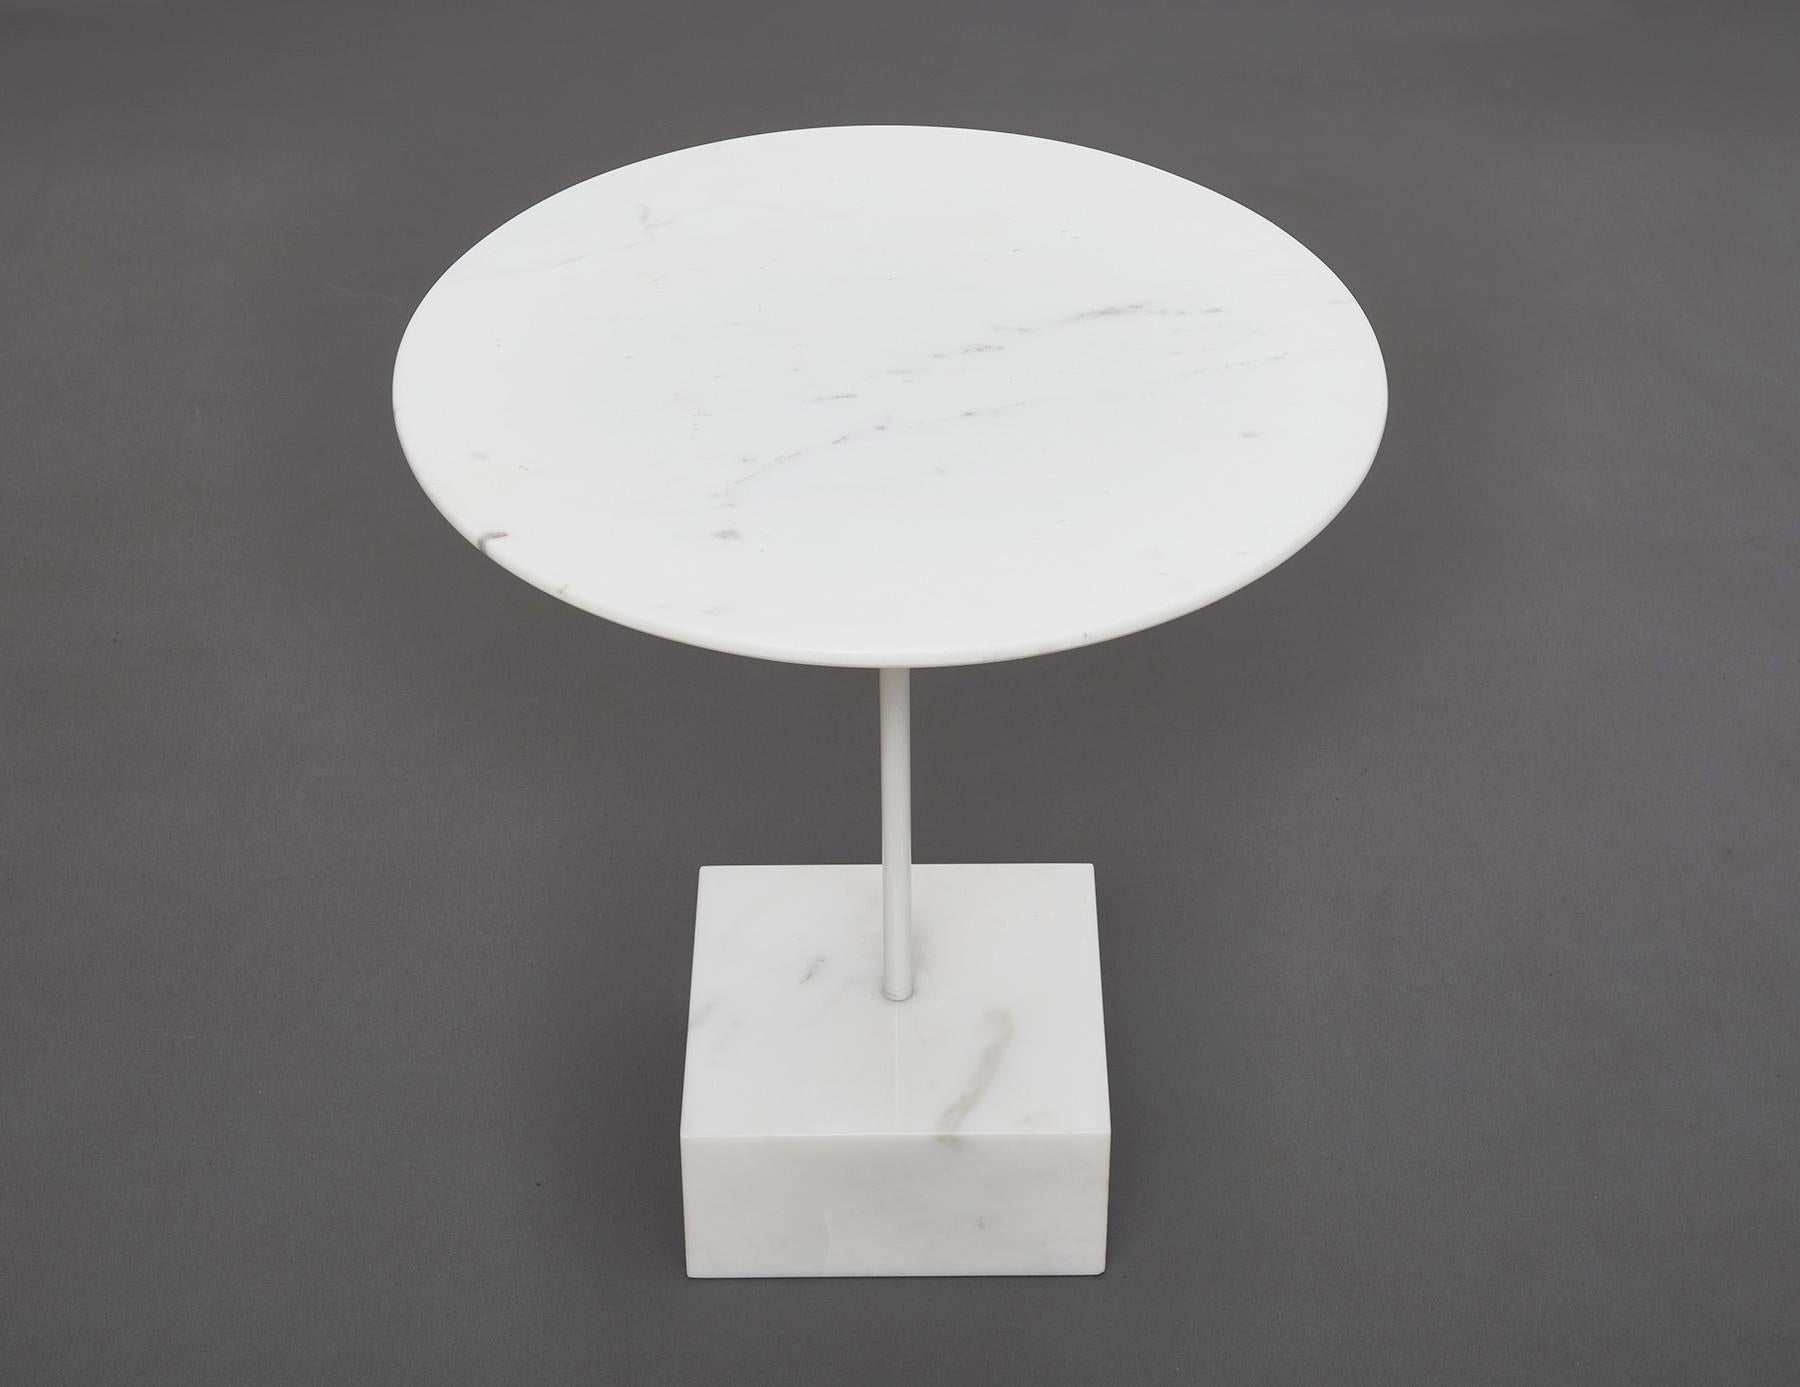 A magnificent original example of the Primavera side table or guéridon by Italian master designer Ettore Sottsass edited by Ultima Edizione end of the Eighties.

Both the round top and the square base are in beautiful Statutario Carrara marble